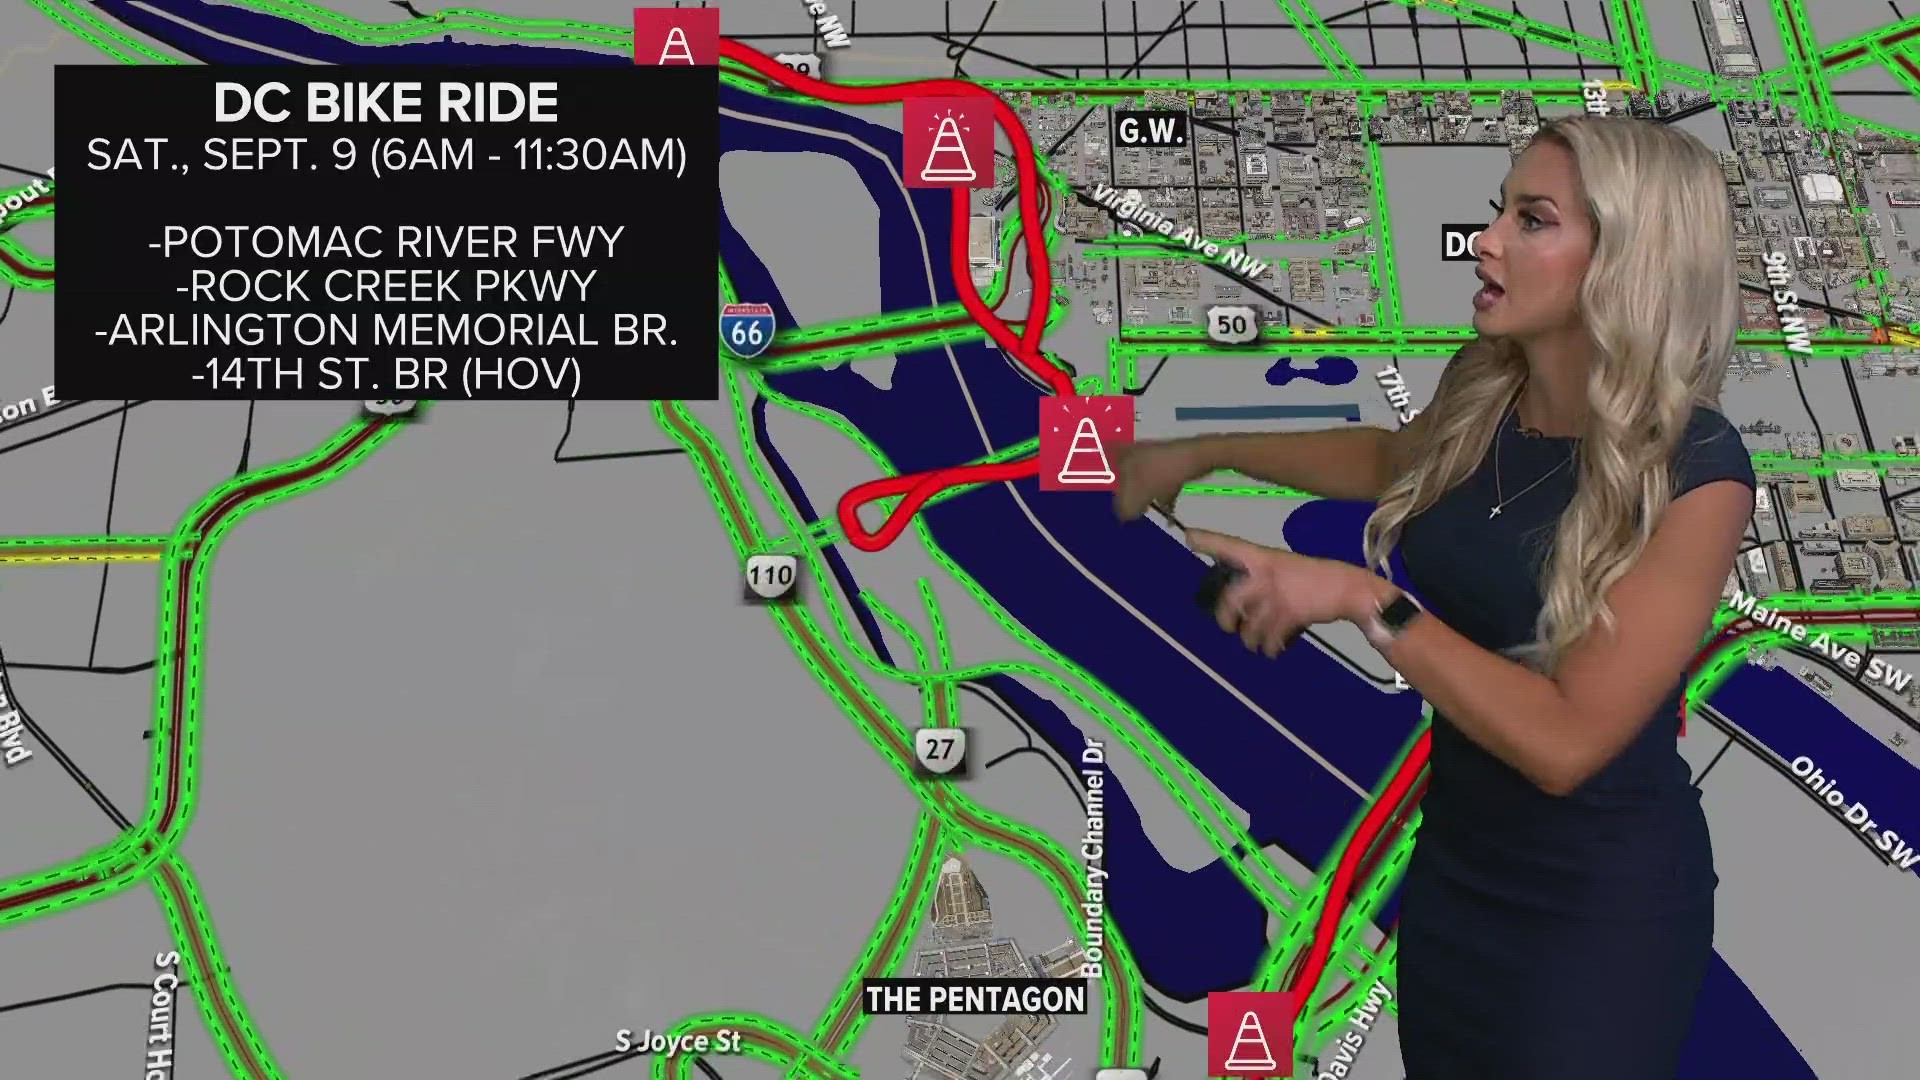 Here's what you need to know as thousands of cyclists head to the District.